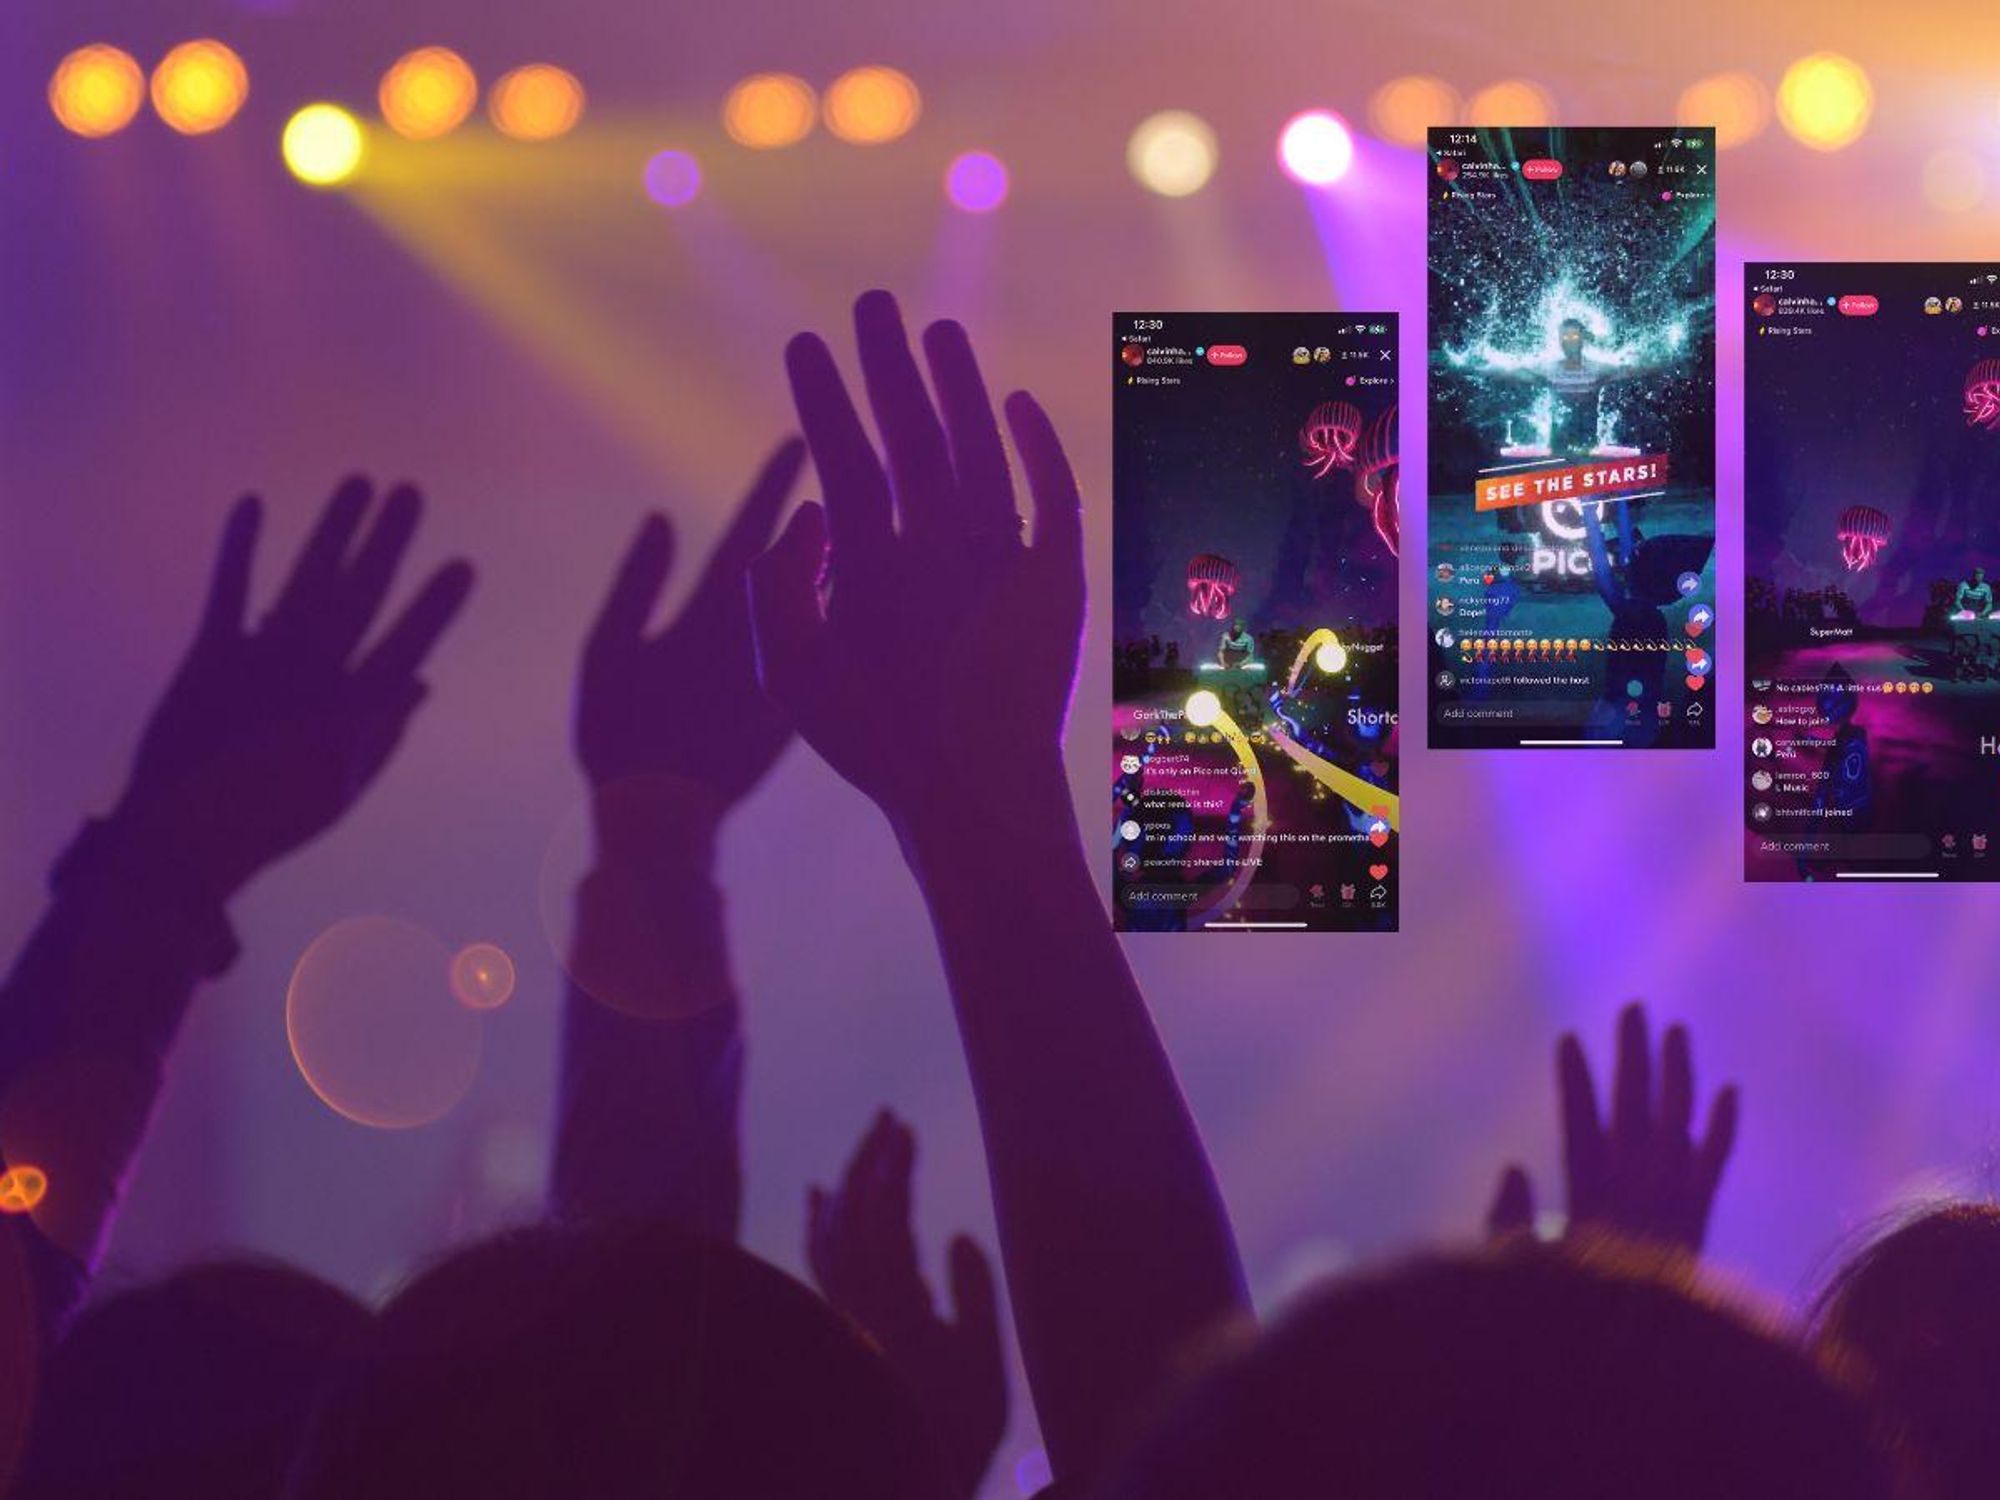 Watch the AR concert that opened up the 2020 League of Legends